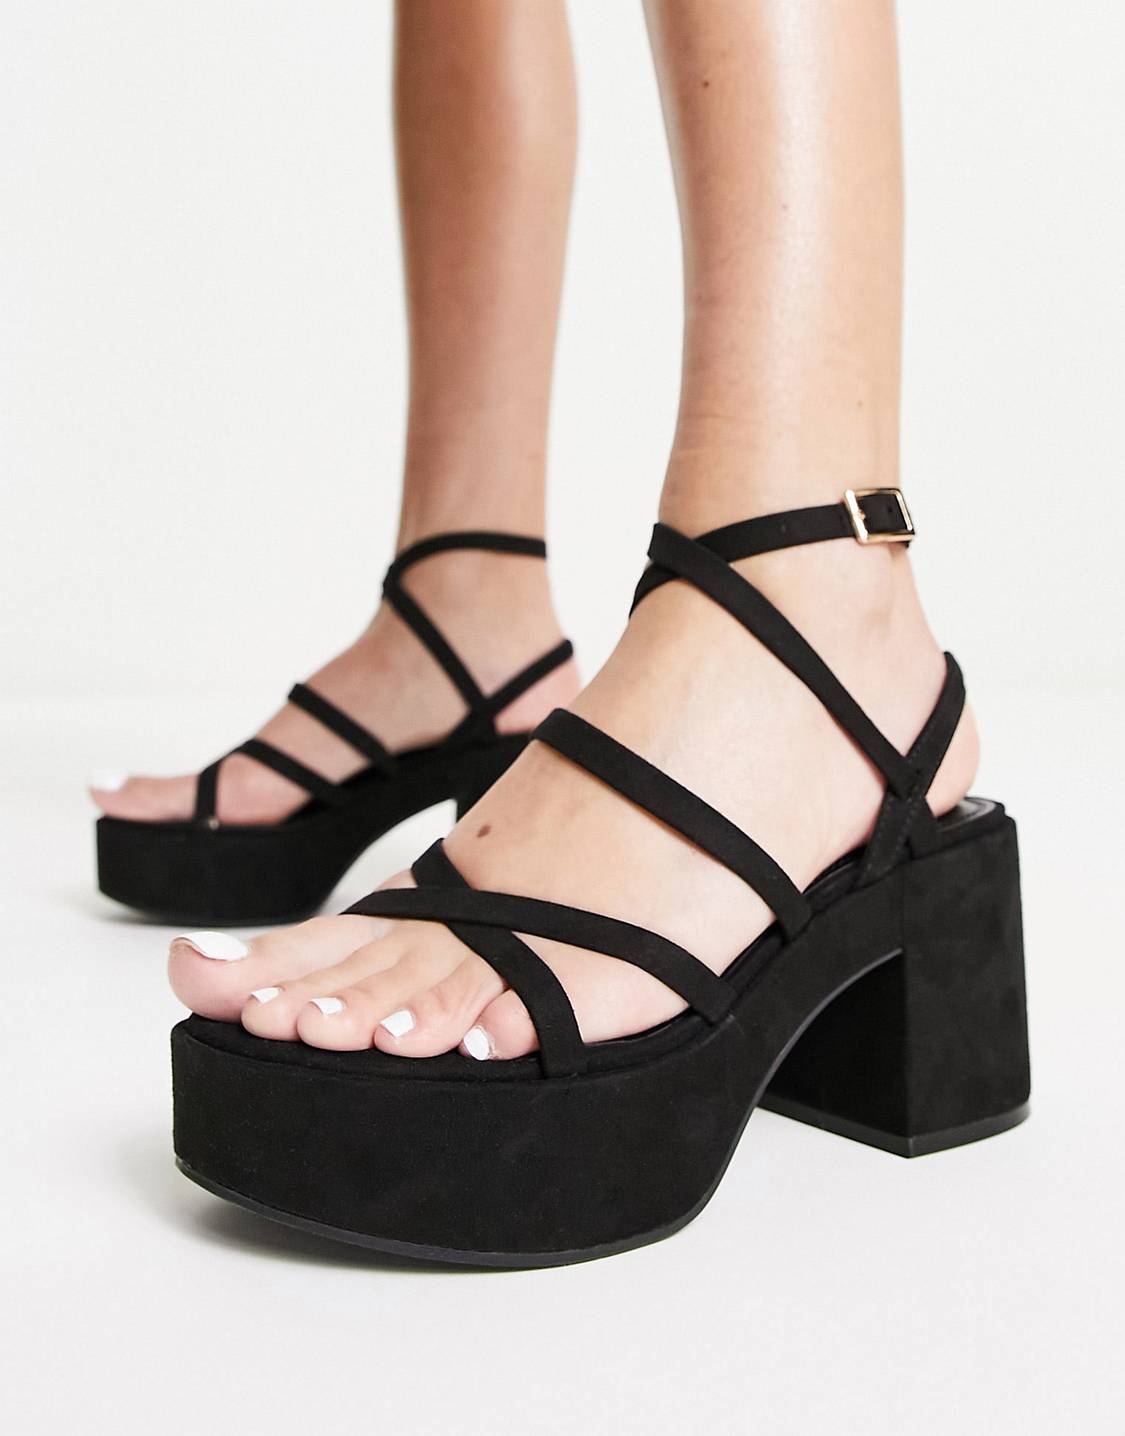 Hoxton chunky mid platforms sandals in black